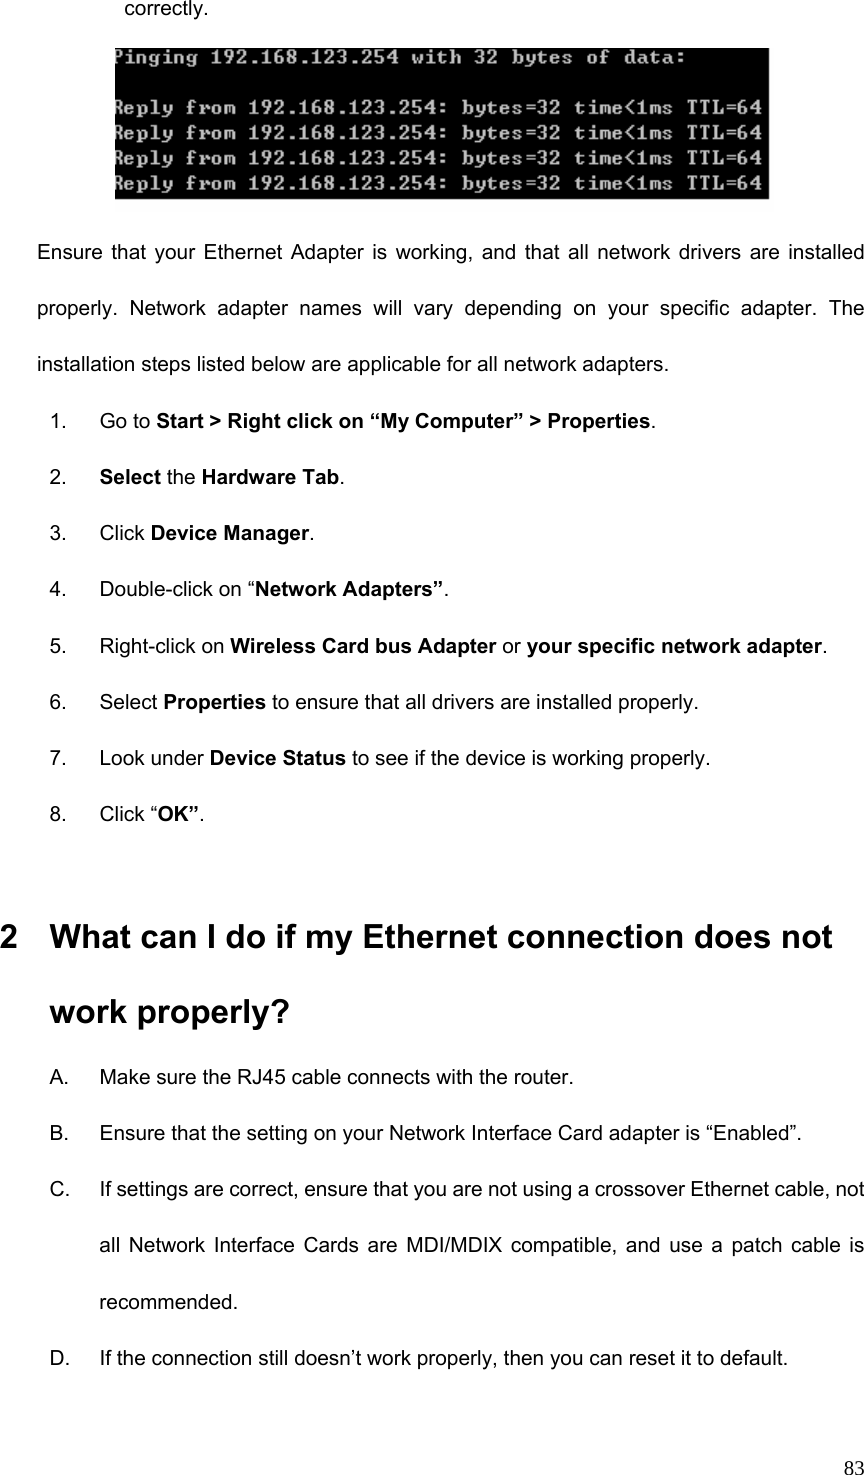  83correctly.  Ensure that your Ethernet Adapter is working, and that all network drivers are installed properly. Network adapter names will vary depending on your specific adapter. The installation steps listed below are applicable for all network adapters. 1. Go to Start &gt; Right click on “My Computer” &gt; Properties. 2.  Select the Hardware Tab. 3. Click Device Manager. 4. Double-click on “Network Adapters”. 5. Right-click on Wireless Card bus Adapter or your specific network adapter. 6. Select Properties to ensure that all drivers are installed properly. 7. Look under Device Status to see if the device is working properly. 8. Click “OK”.  2  What can I do if my Ethernet connection does not work properly? A.  Make sure the RJ45 cable connects with the router. B.  Ensure that the setting on your Network Interface Card adapter is “Enabled”. C.  If settings are correct, ensure that you are not using a crossover Ethernet cable, not all Network Interface Cards are MDI/MDIX compatible, and use a patch cable is recommended. D.  If the connection still doesn’t work properly, then you can reset it to default.      